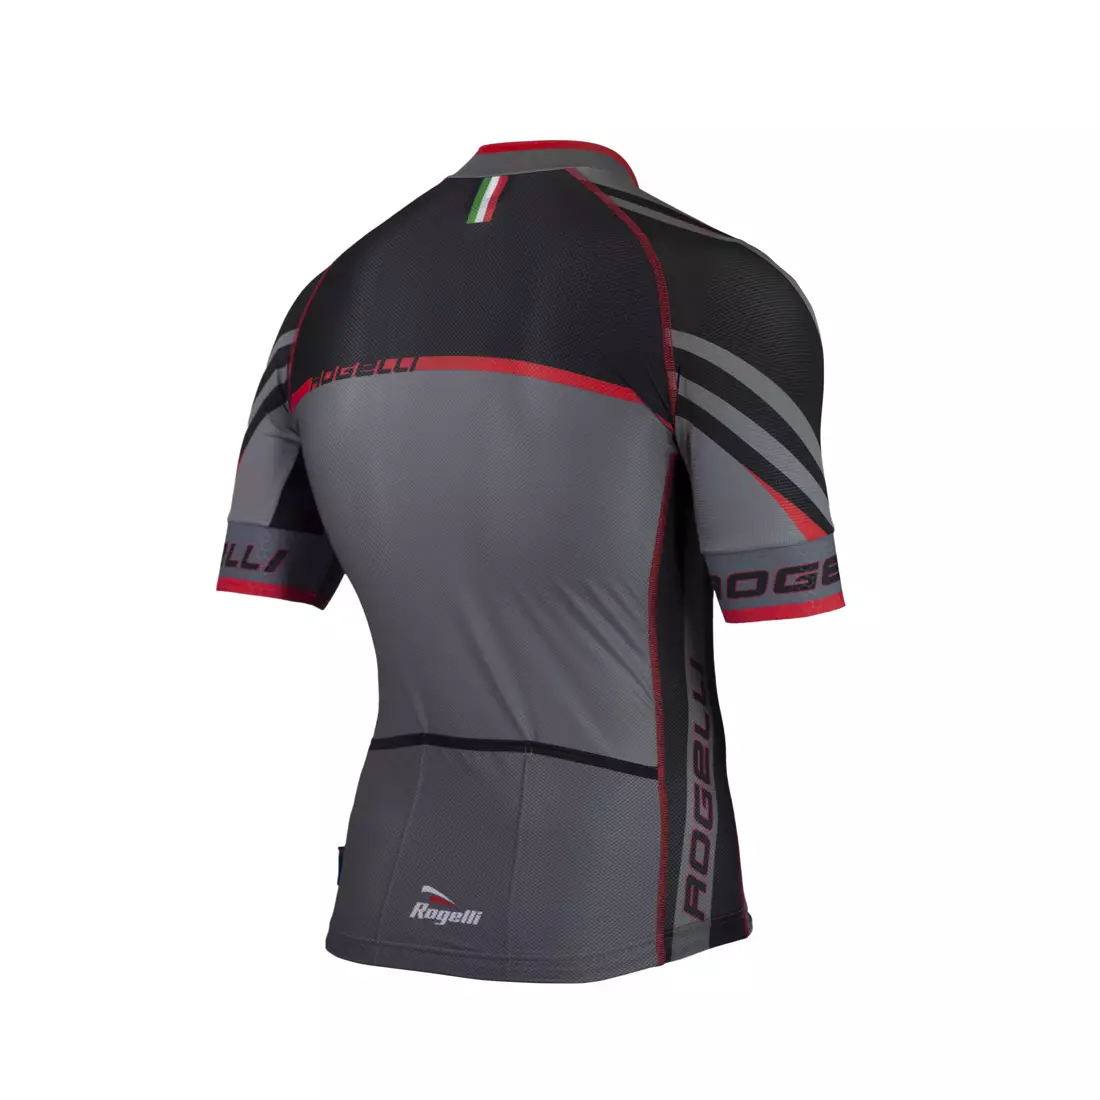 ROGELLI BIKE 001.317 ANDRANO 2.0 cycling jersey, black and red